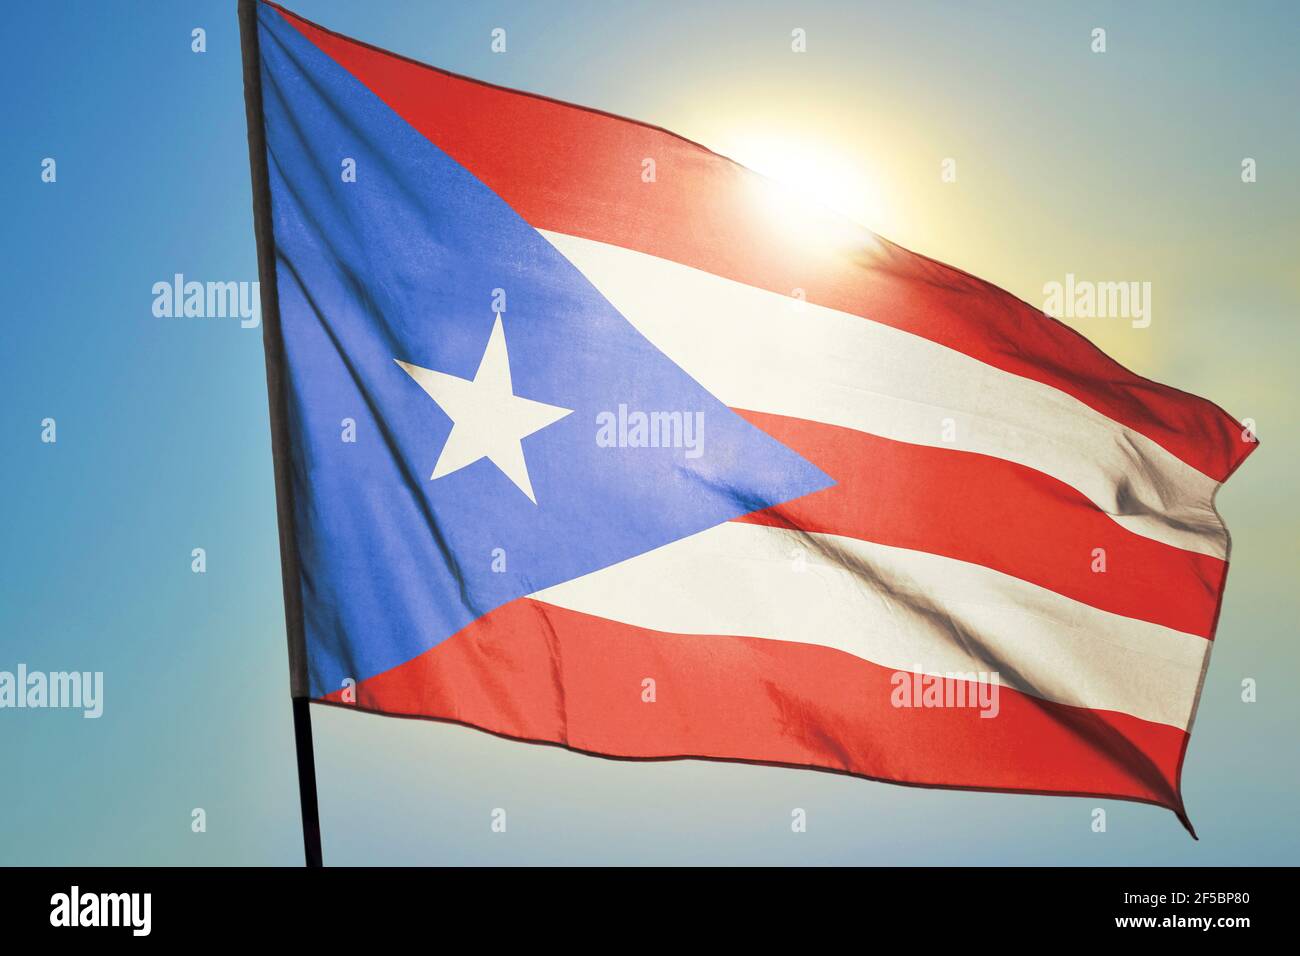 Puerto Rico flag waving on the wind in front of sun Stock Photo